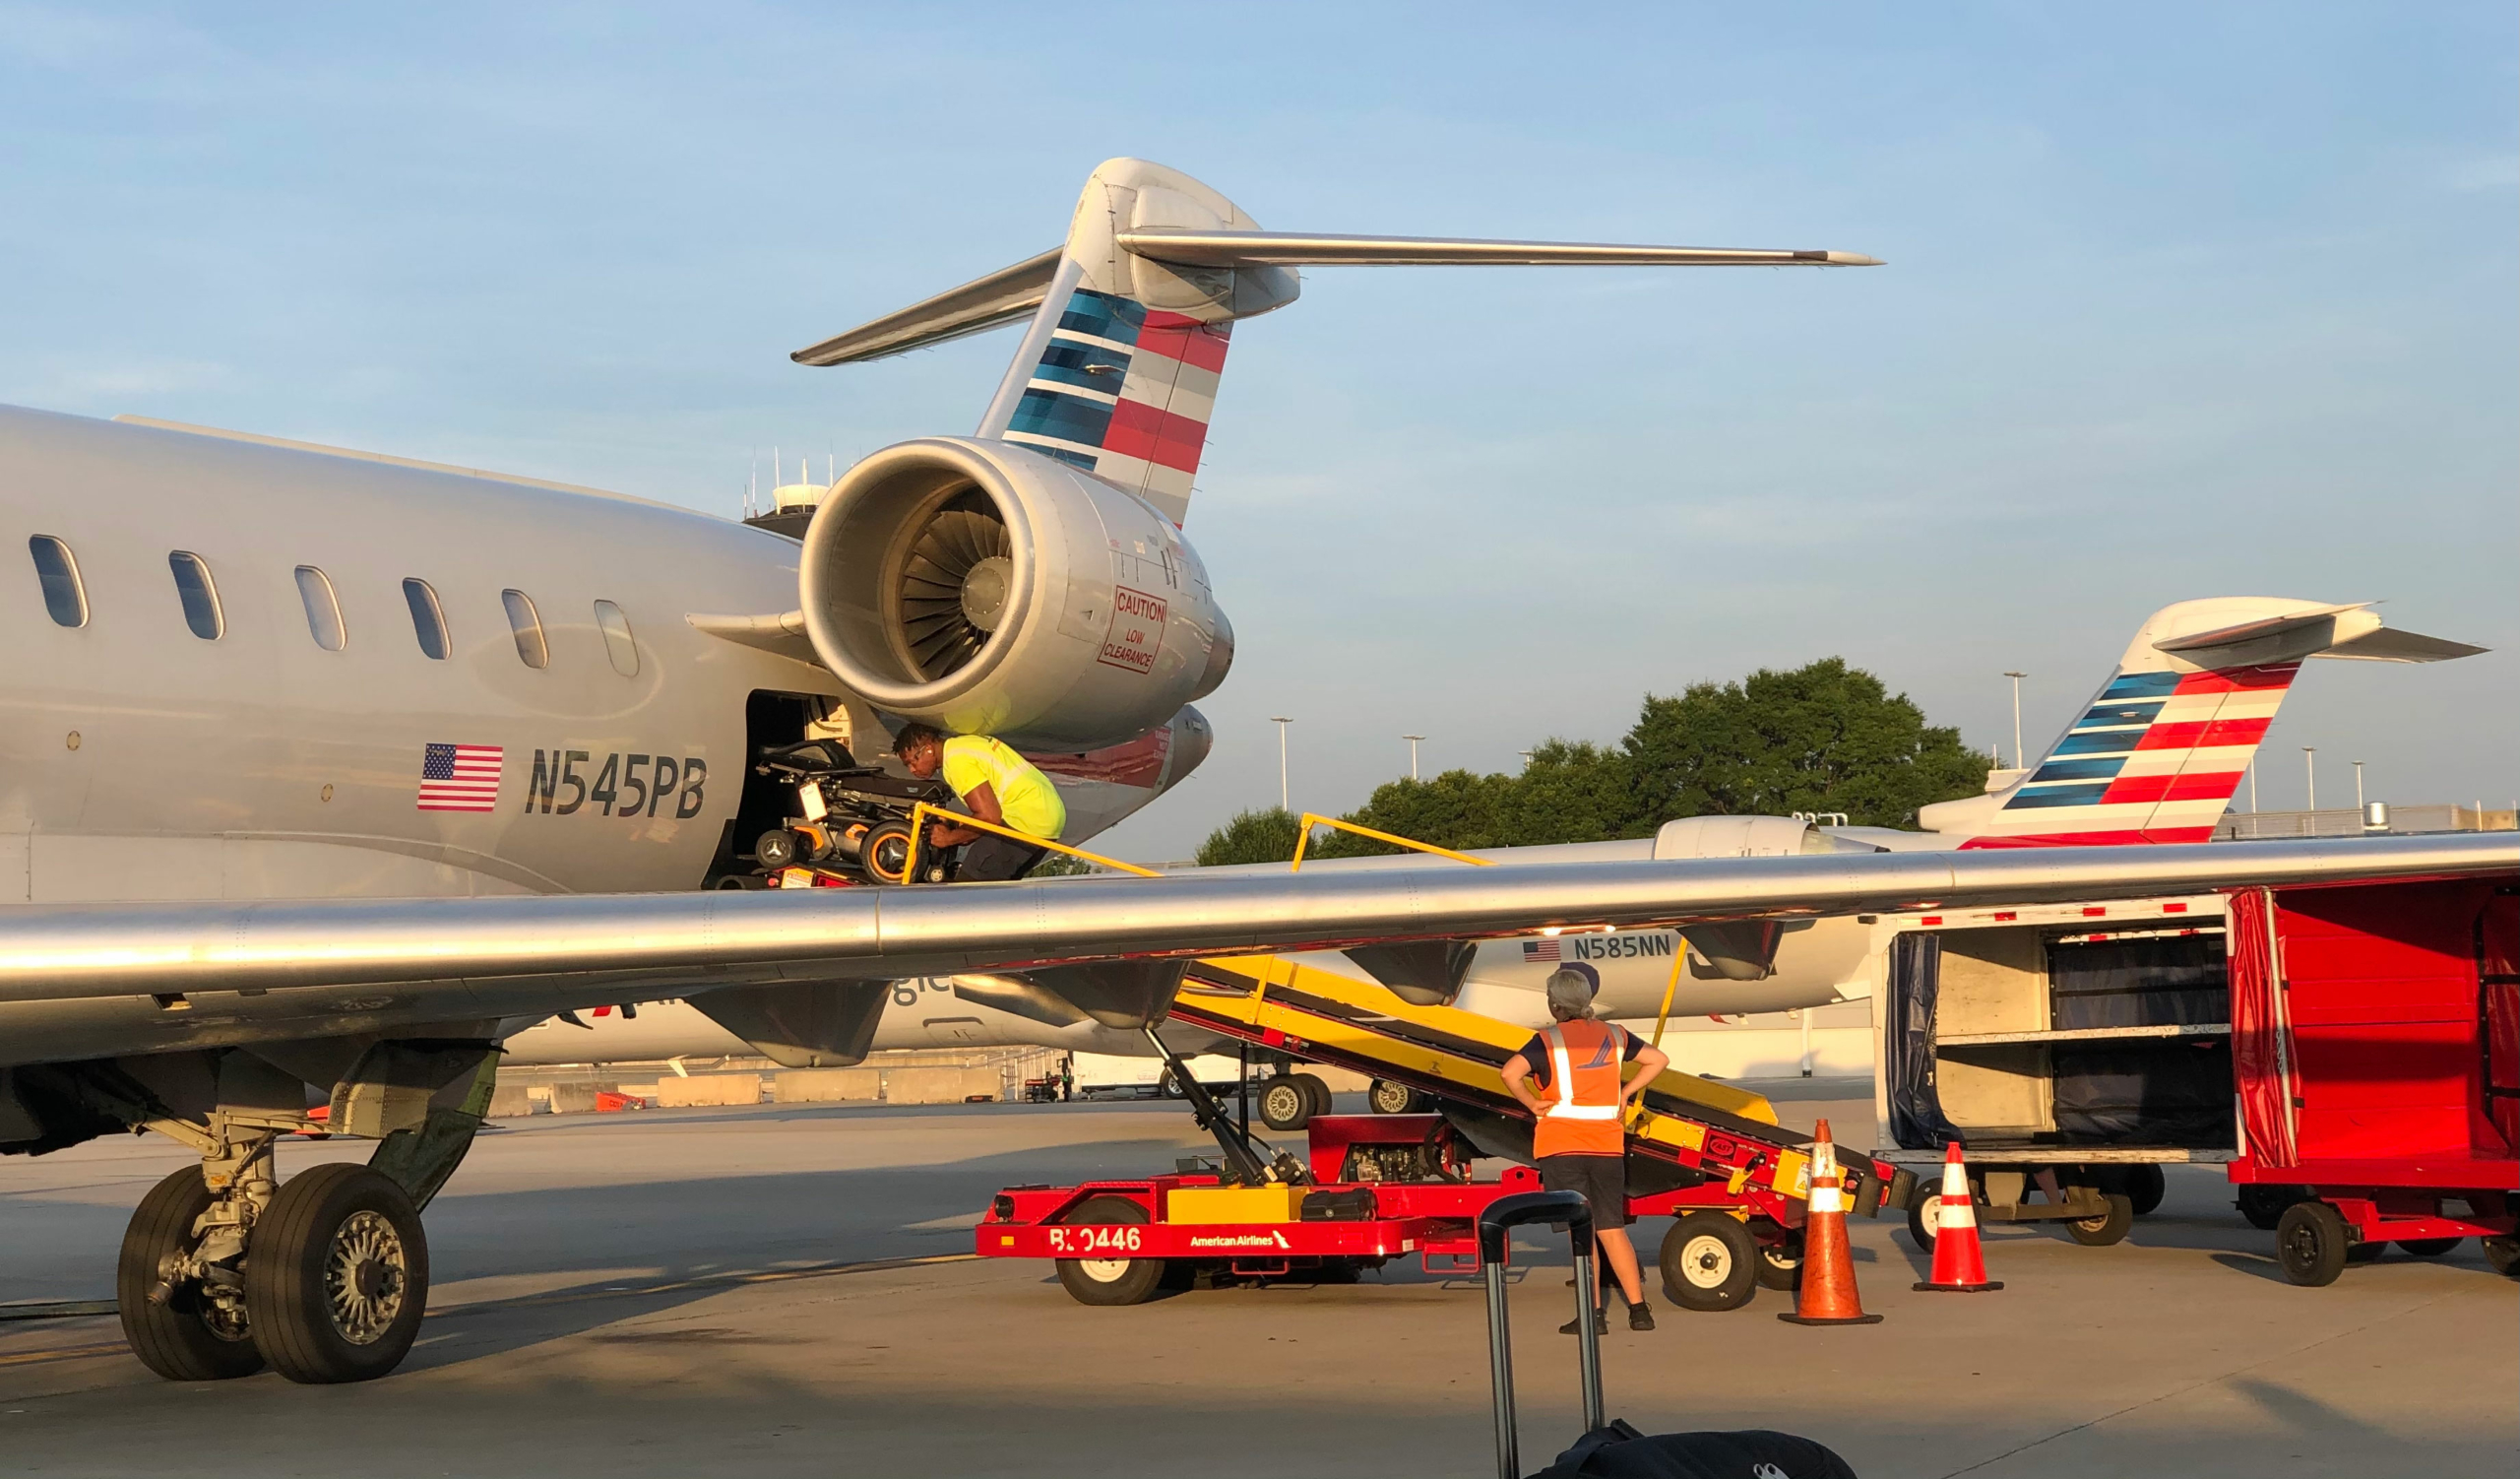 Image shows a power wheelchair going up the baggage ramp onto an American Airlines plane